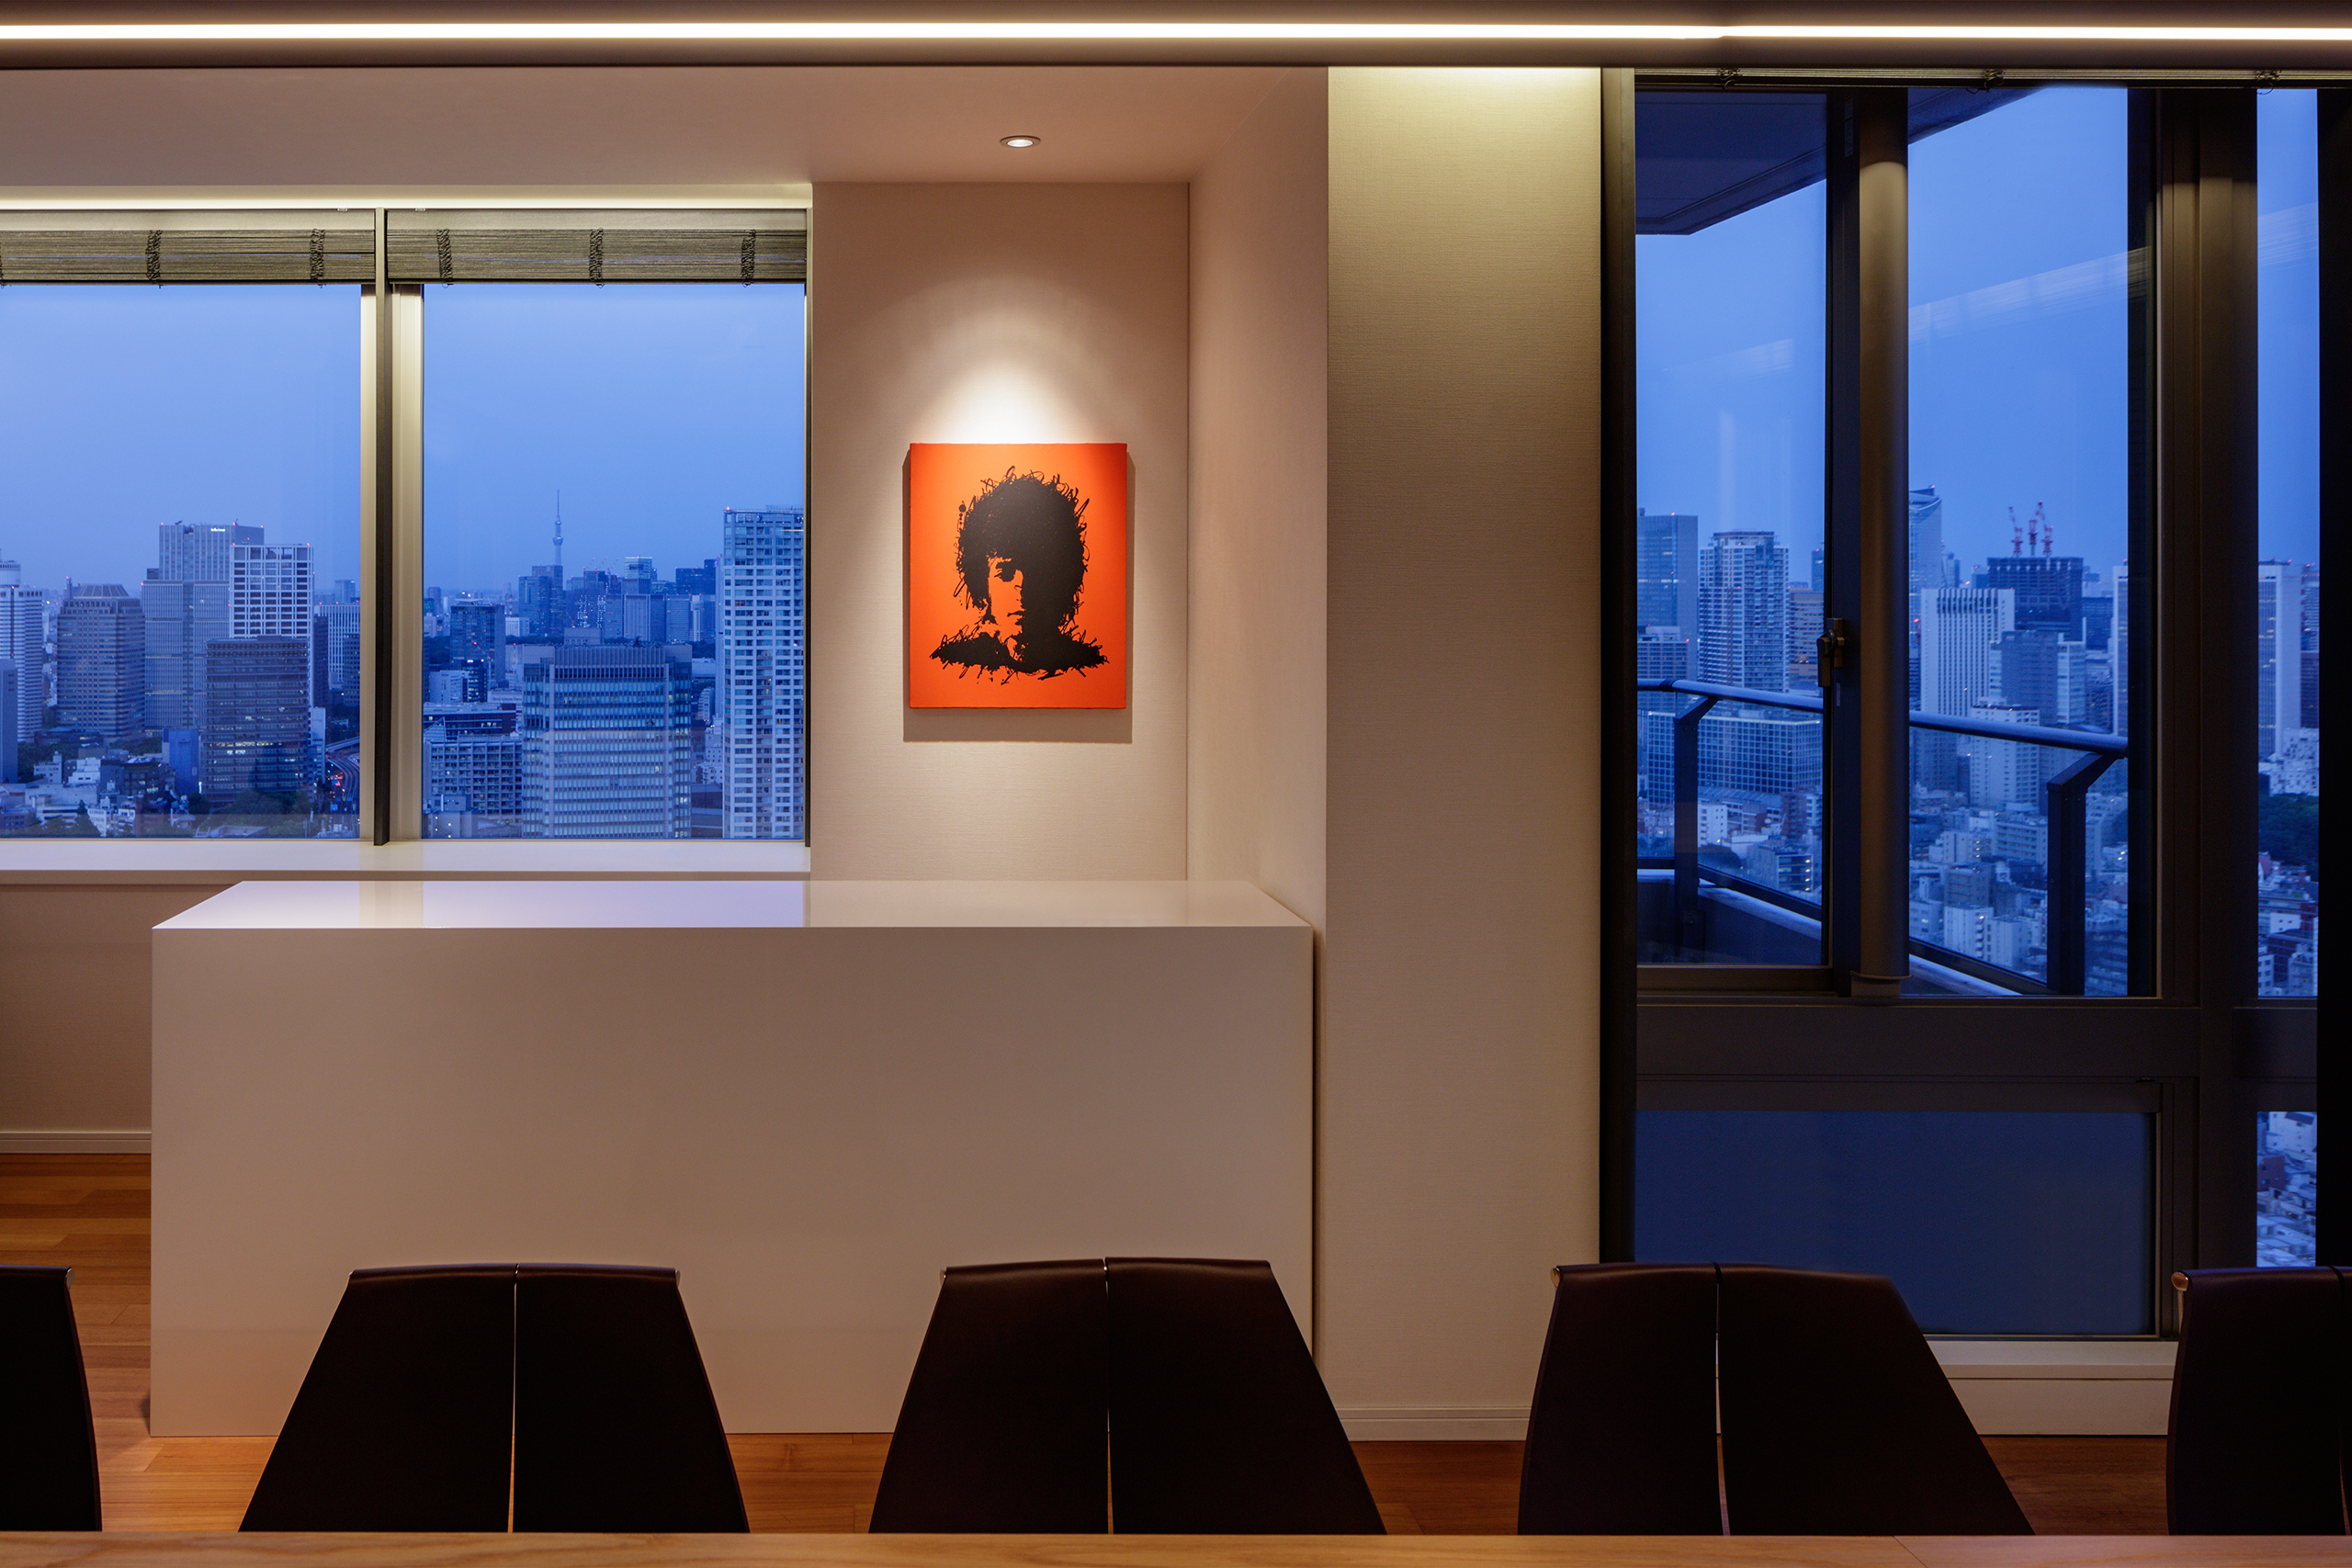 A meeting room where hip peoplenotions would gather. Aoichi Office Meeting Room Artwork